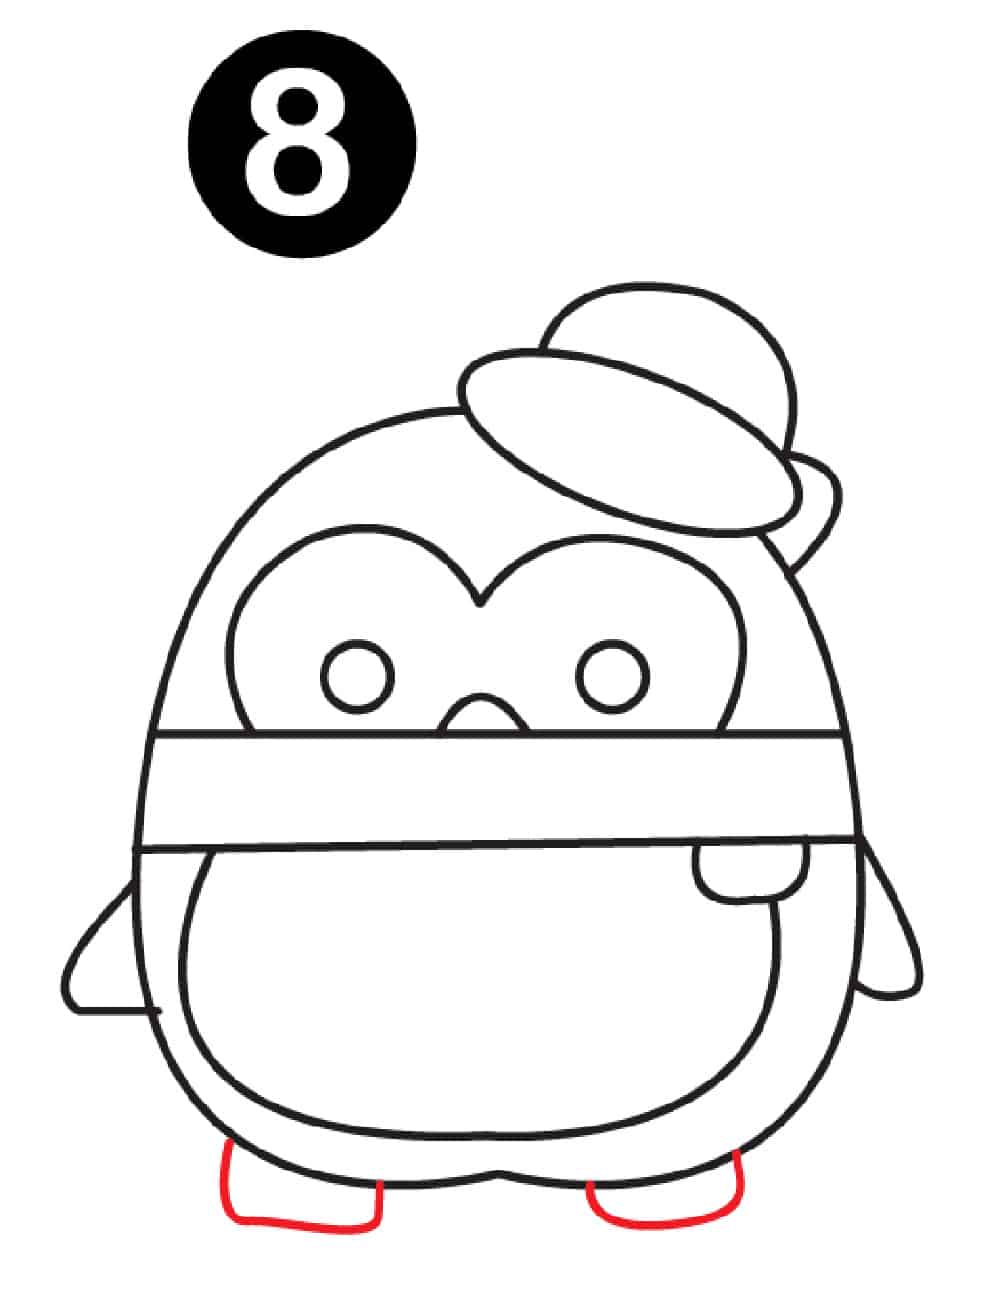 Step 8: Draw two half rectangles on the bottom of the penguin to create feet.